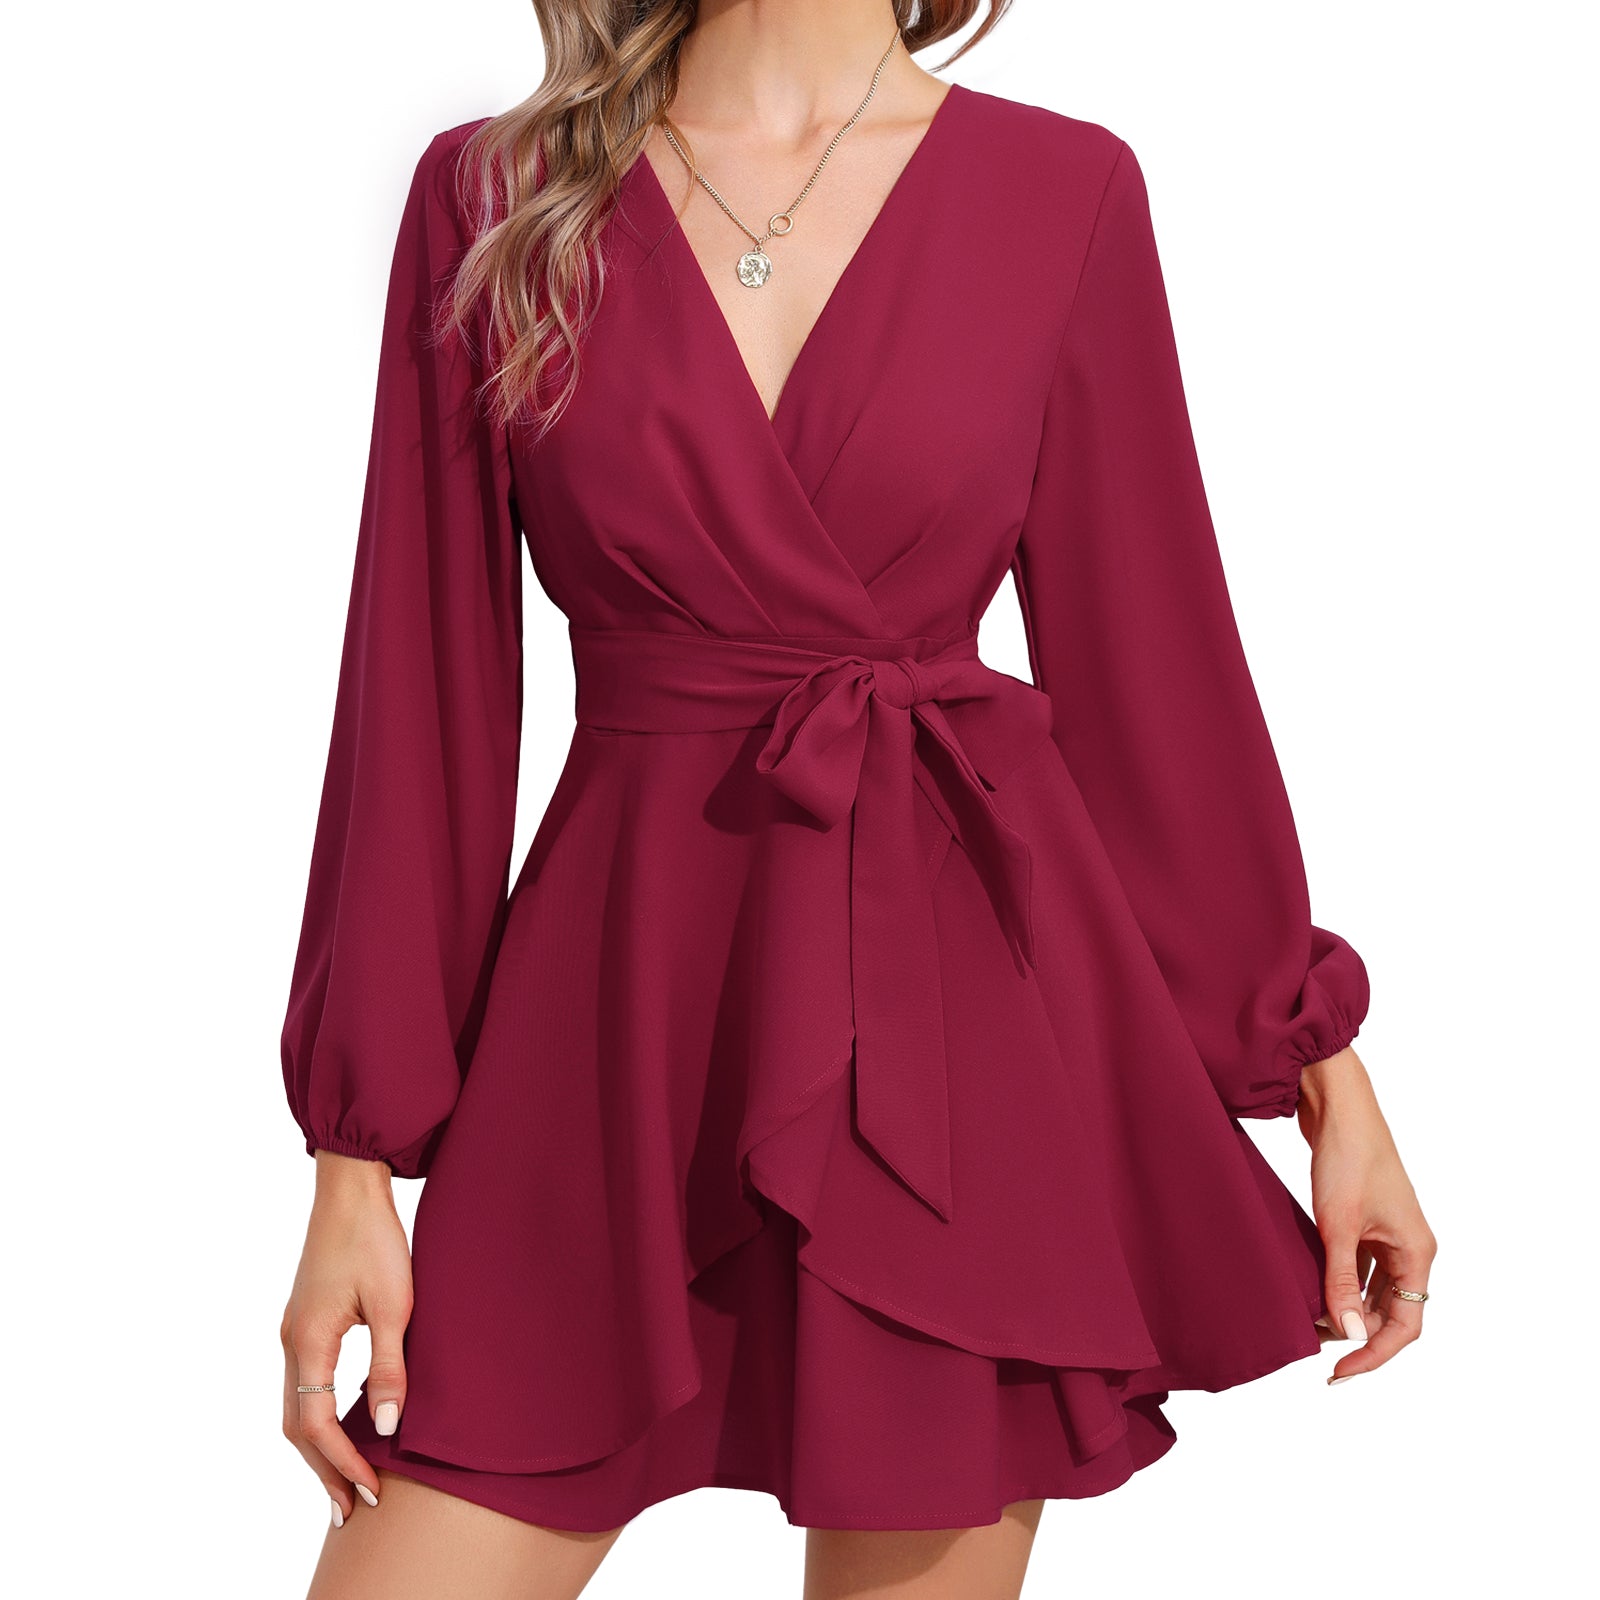 Women's Dresses, Jumpsuits, & Skirts – Branded Country Wear